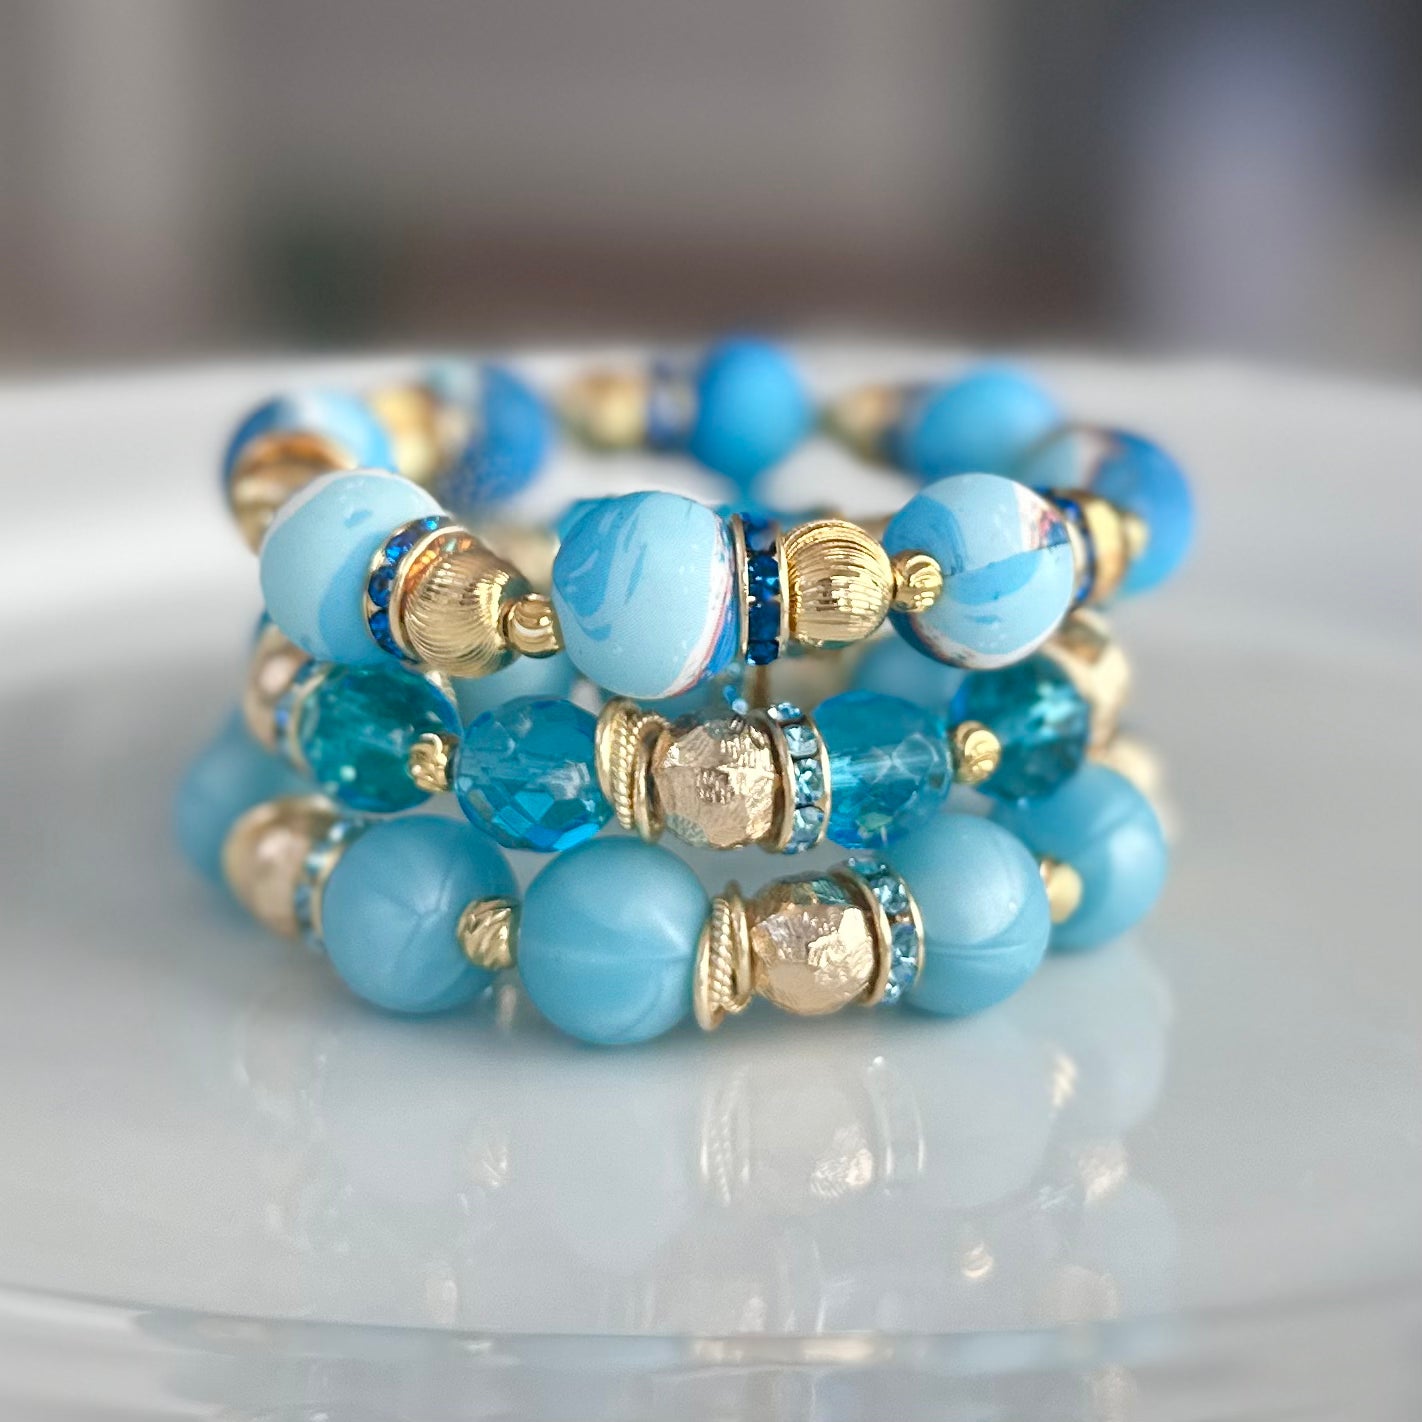 PEARLIZED TURQUOISE AND GOLD BANGLE WITH CZ ACCENTS